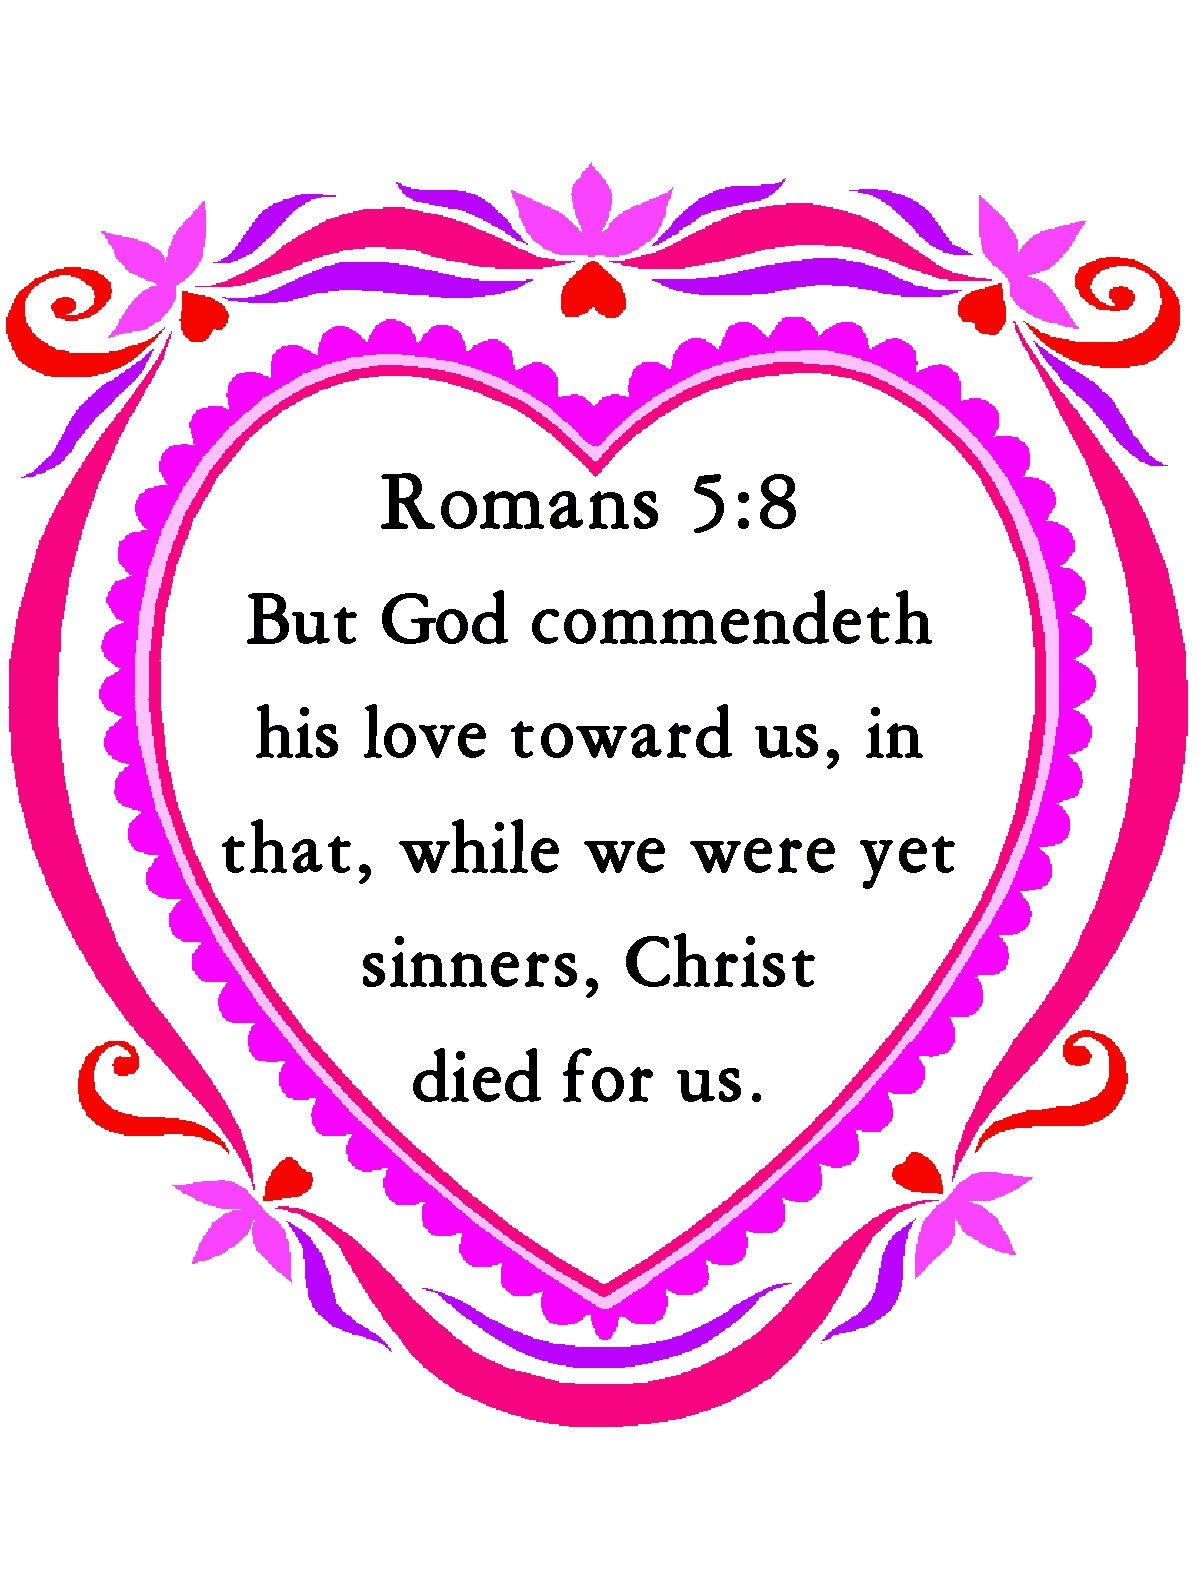 Christian Images In My Treasure Box  Romans 5 8   Valentine Heart    